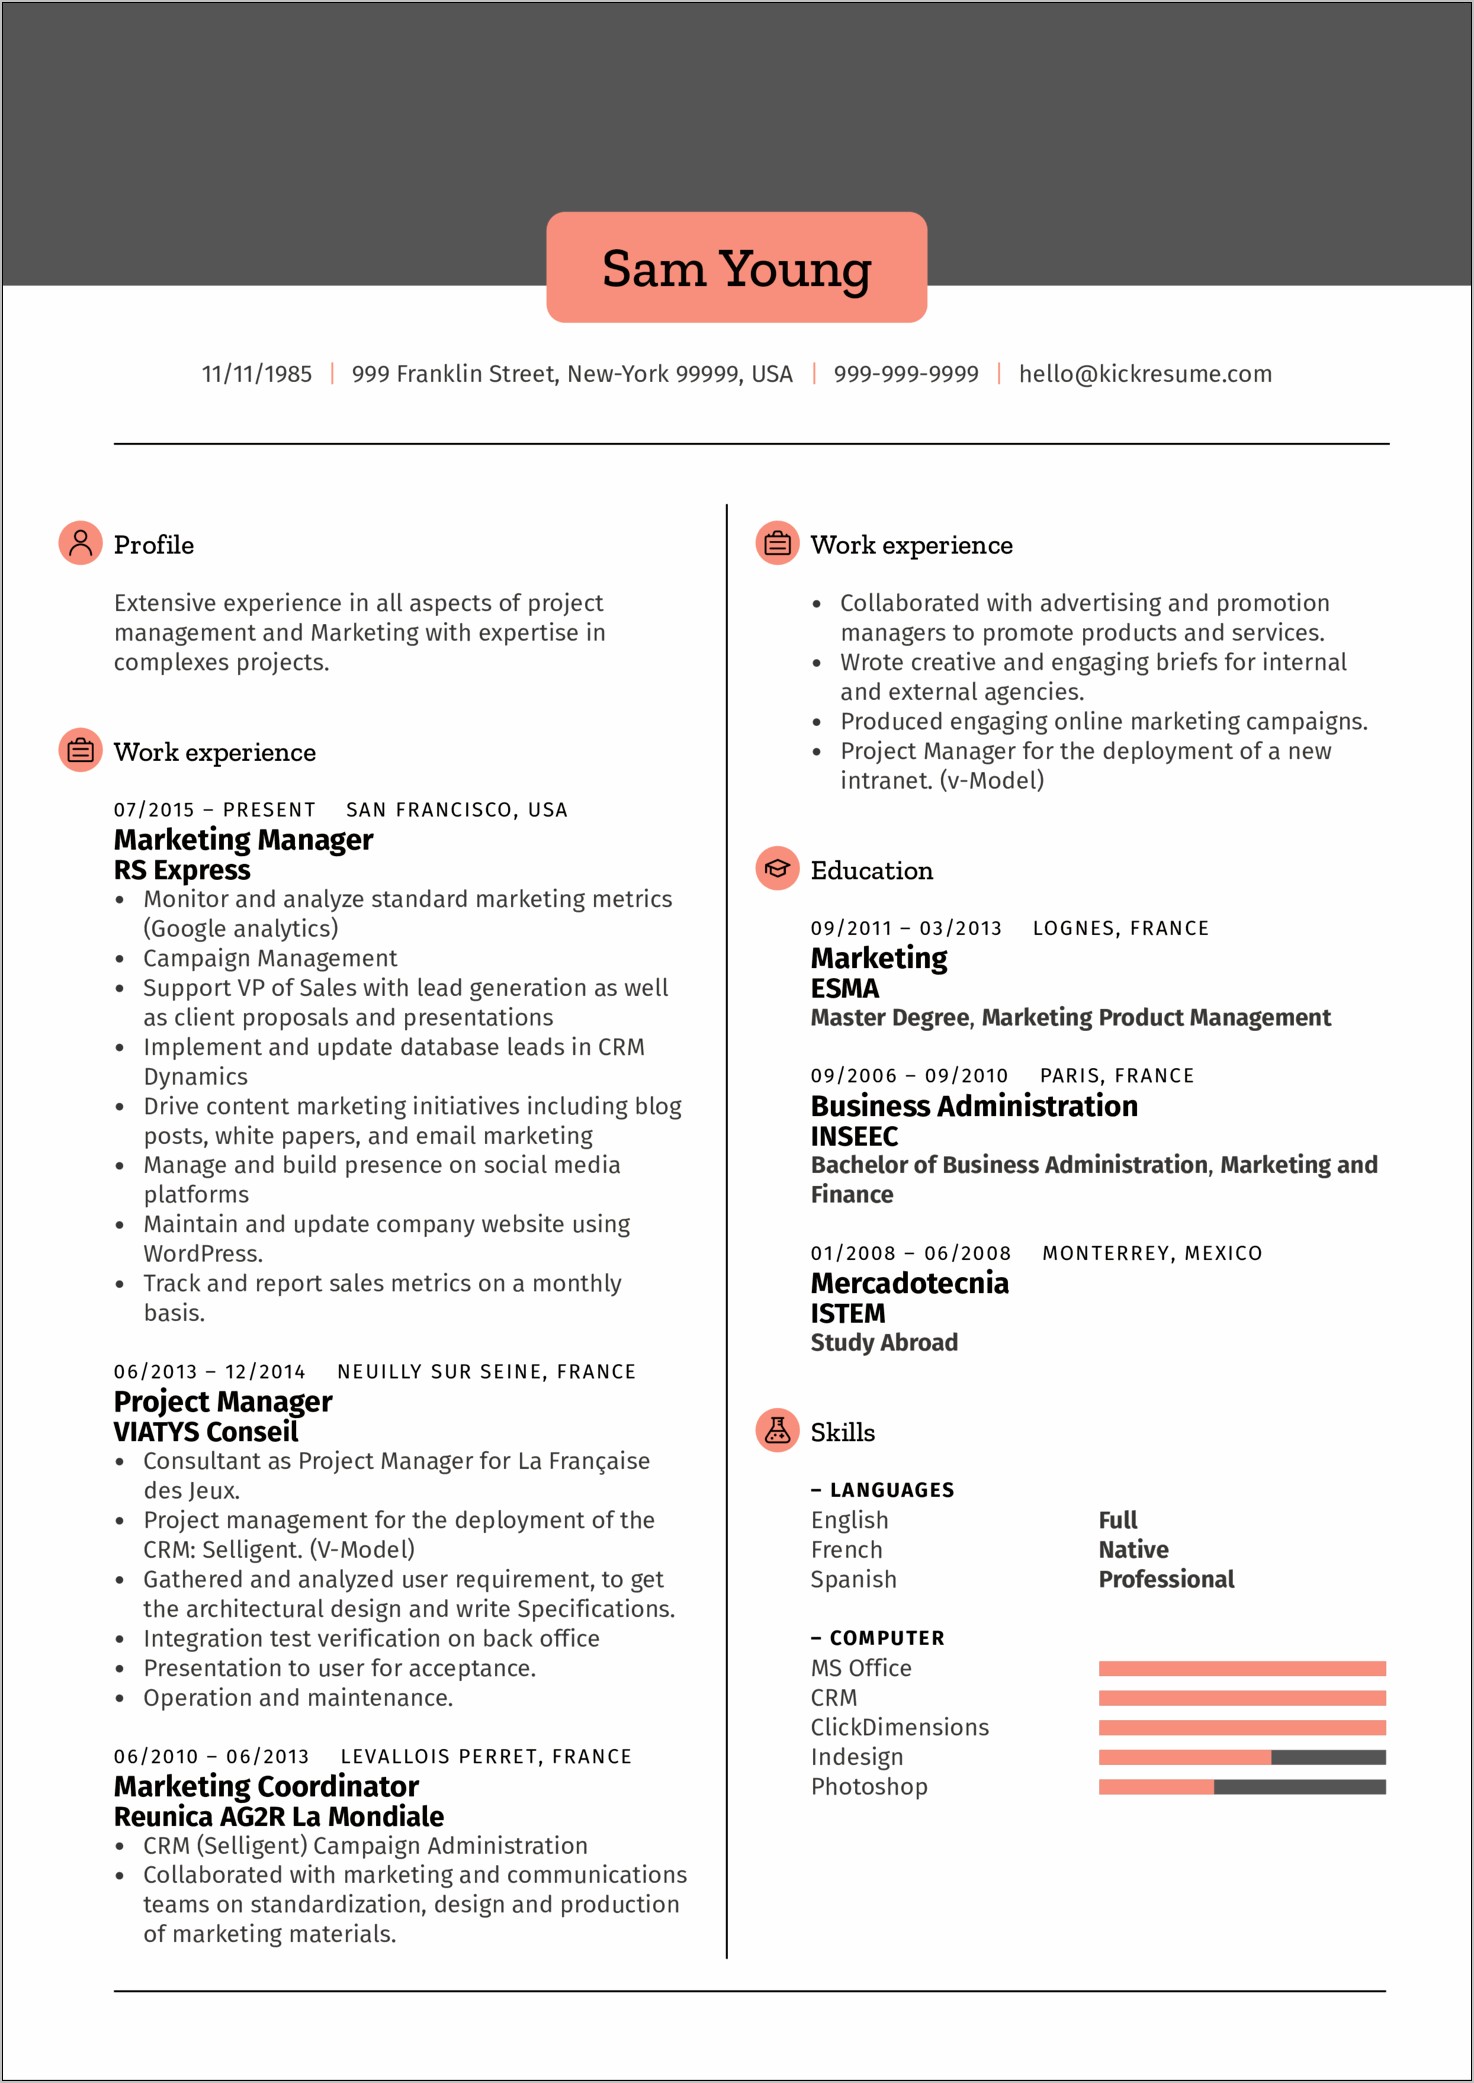 Director Of Marketing And Communications Sample Resume